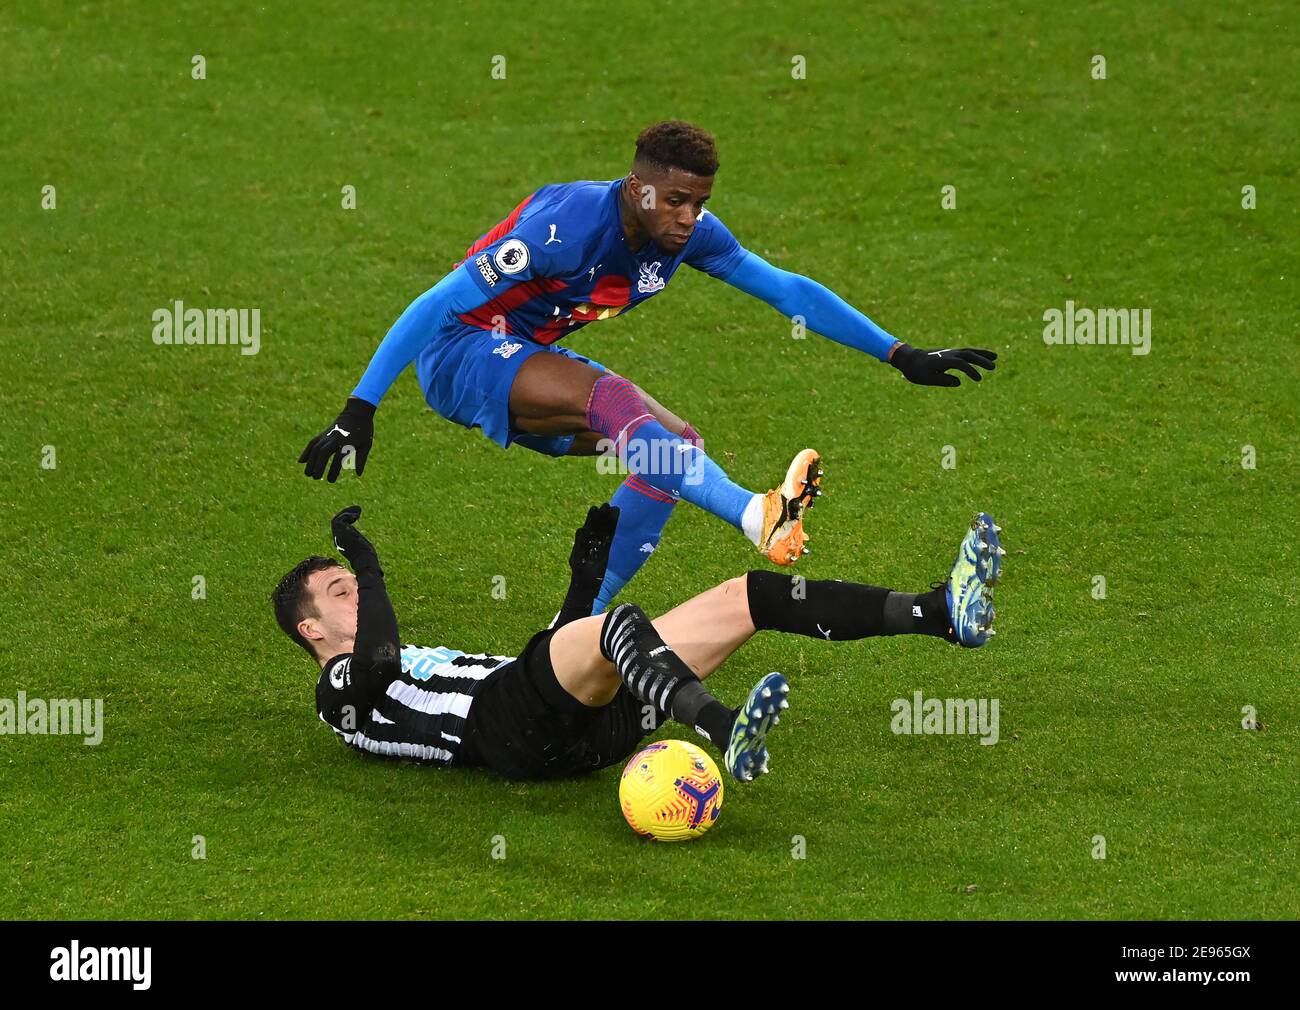 Newcastle United's Javier Manquillo (left) tackles Crystal Palace's Wilfried Zaha during the Premier League match at St. James's Park, Newcastle. Picture date: Tuesday February 2, 2021. Stock Photo